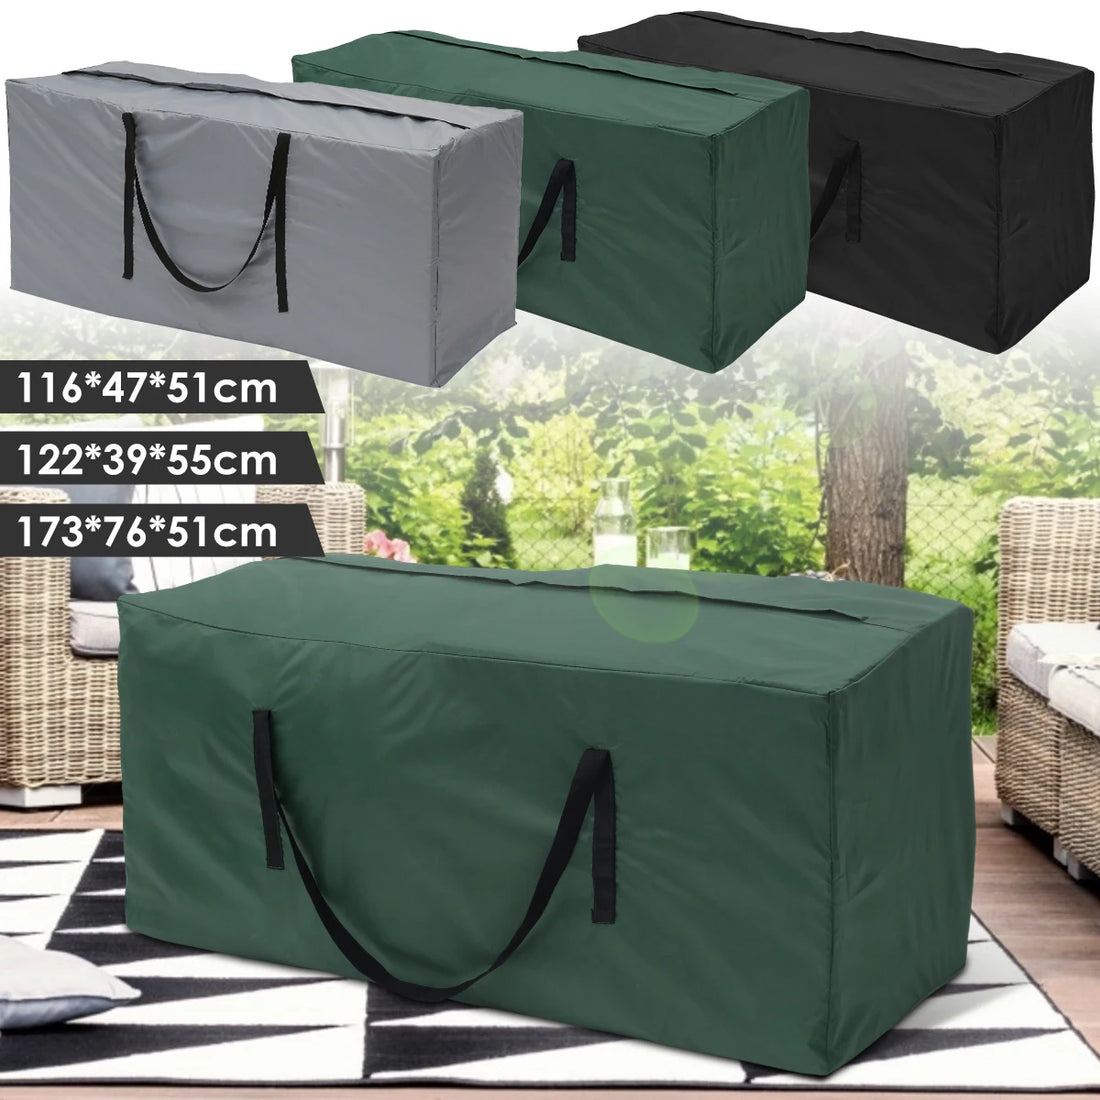  Cushion Storage Bag Large Capacity Furniture Protective Cover Outdoor Garden Waterproof Dustproof Christmas Tree Organizer New #